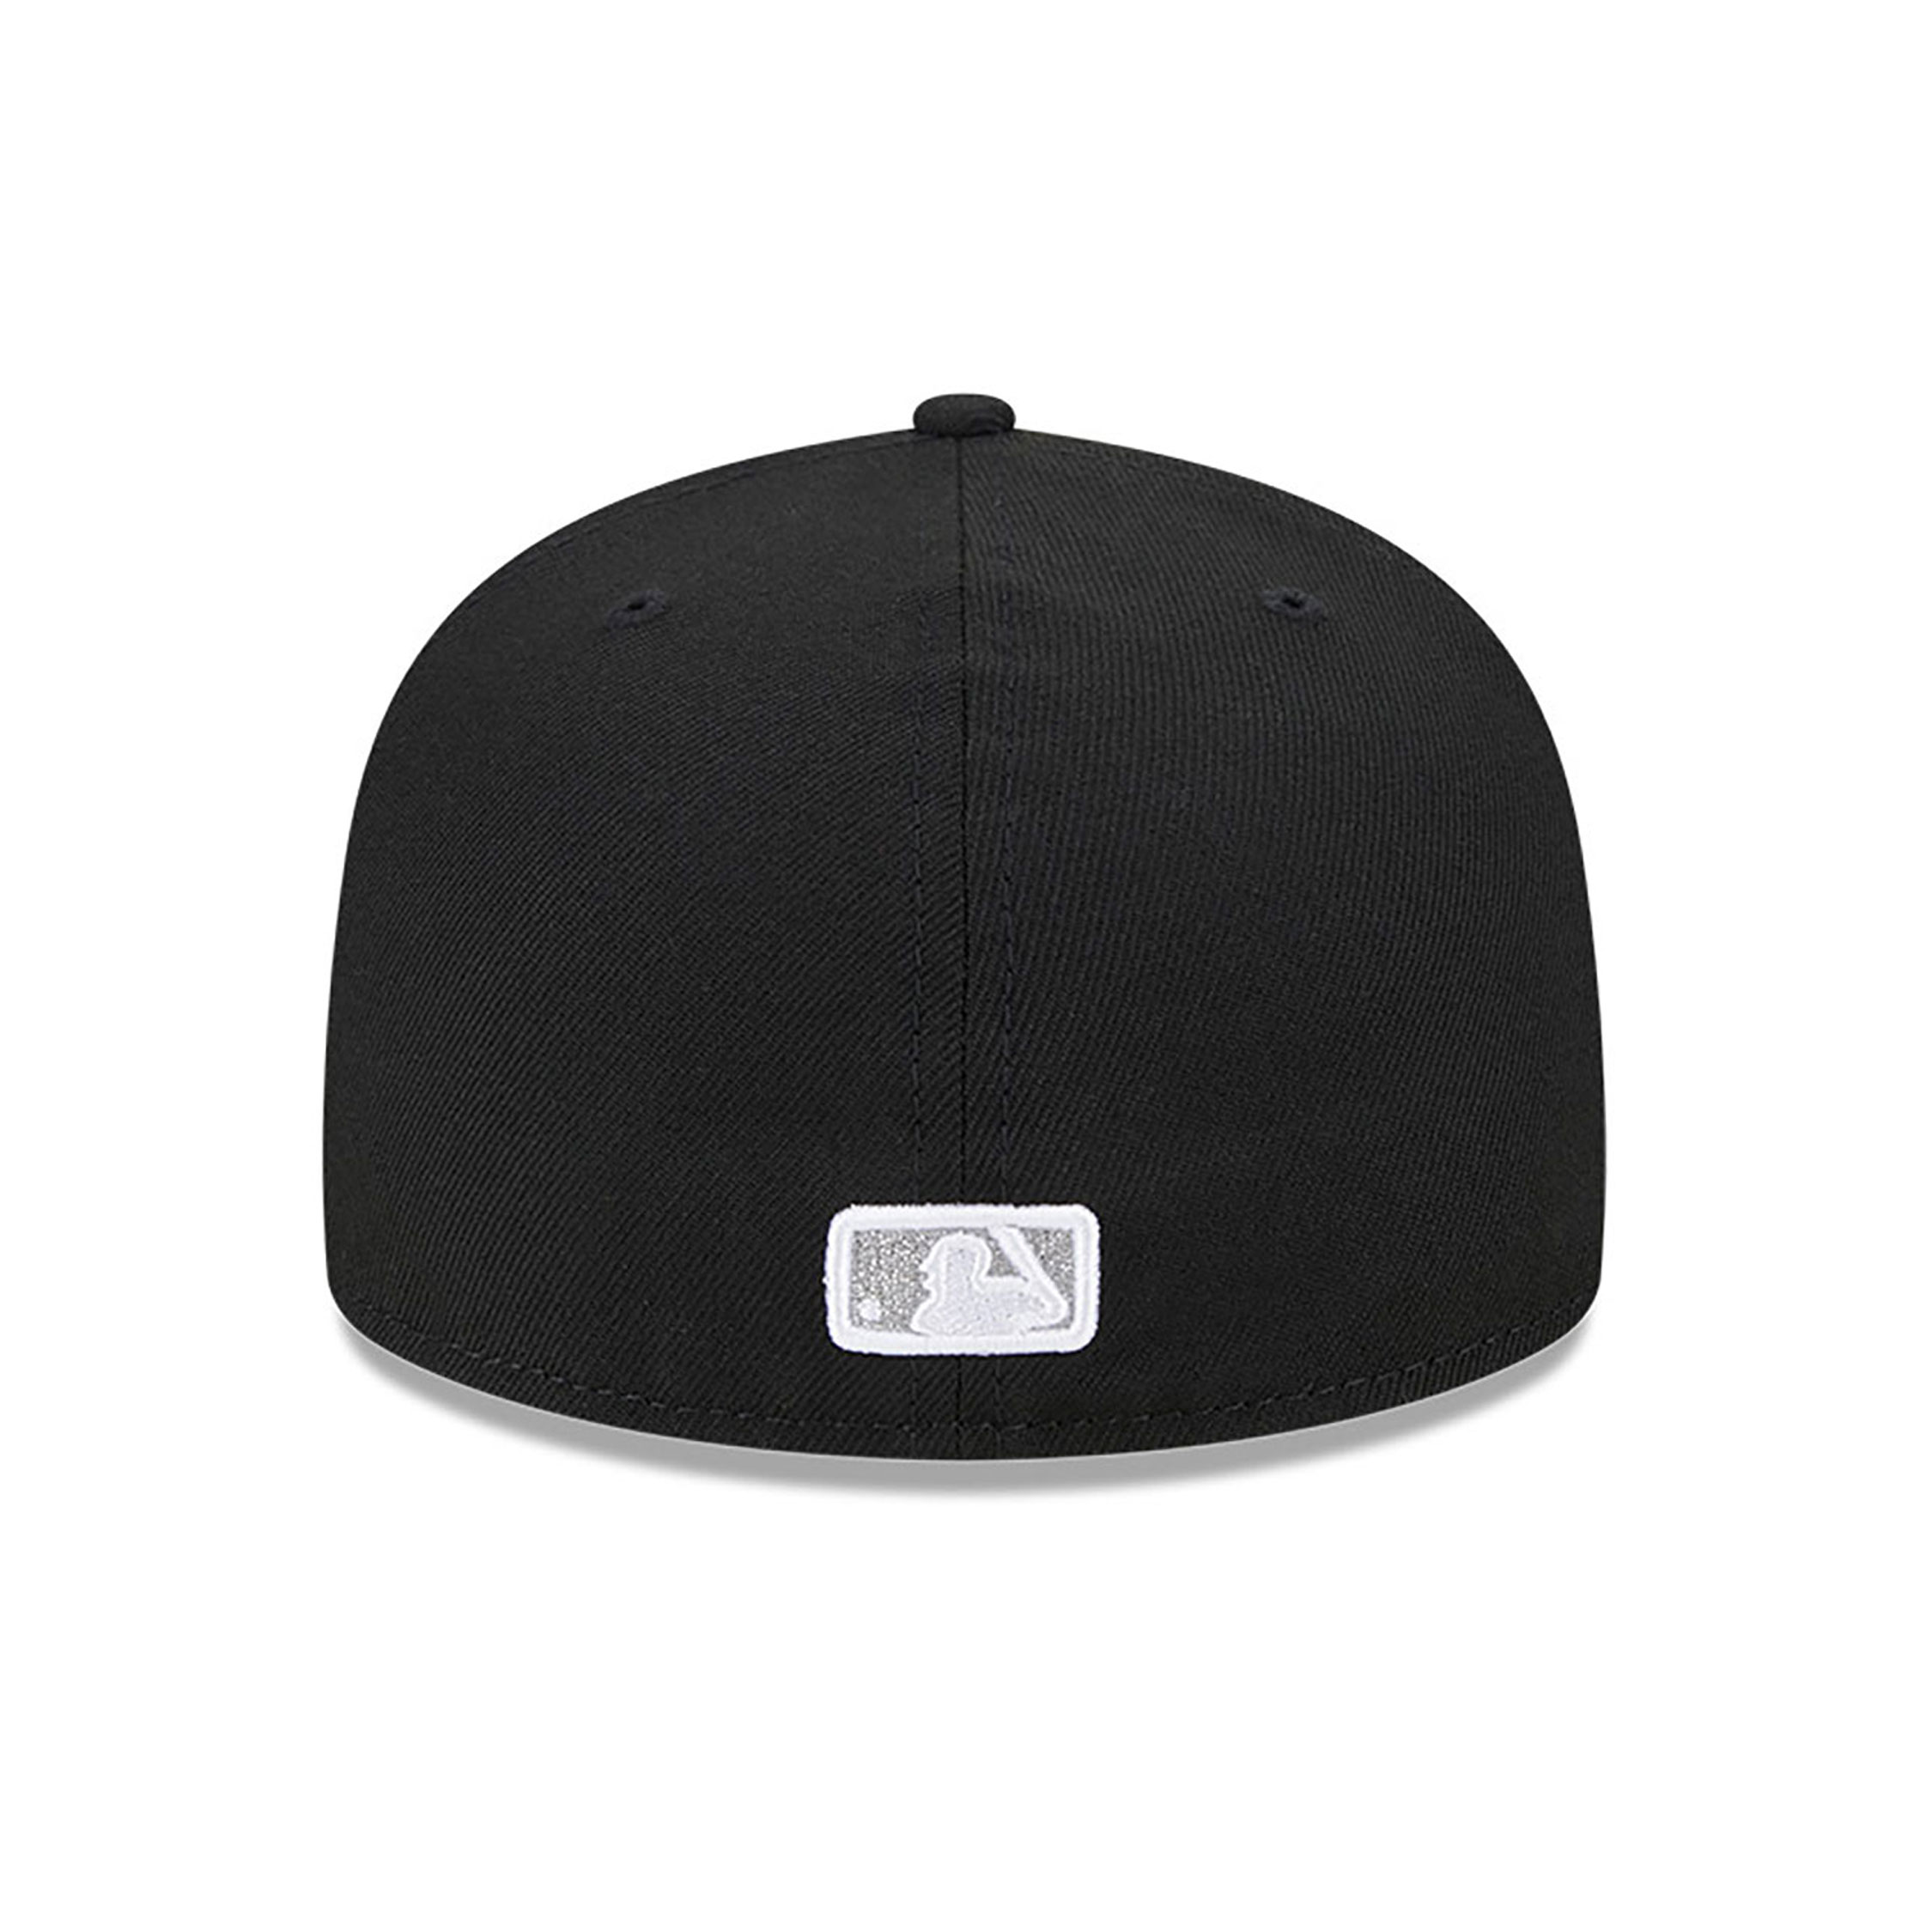 Oakland Athletics Raceway Black 59FIFTY Fitted Cap